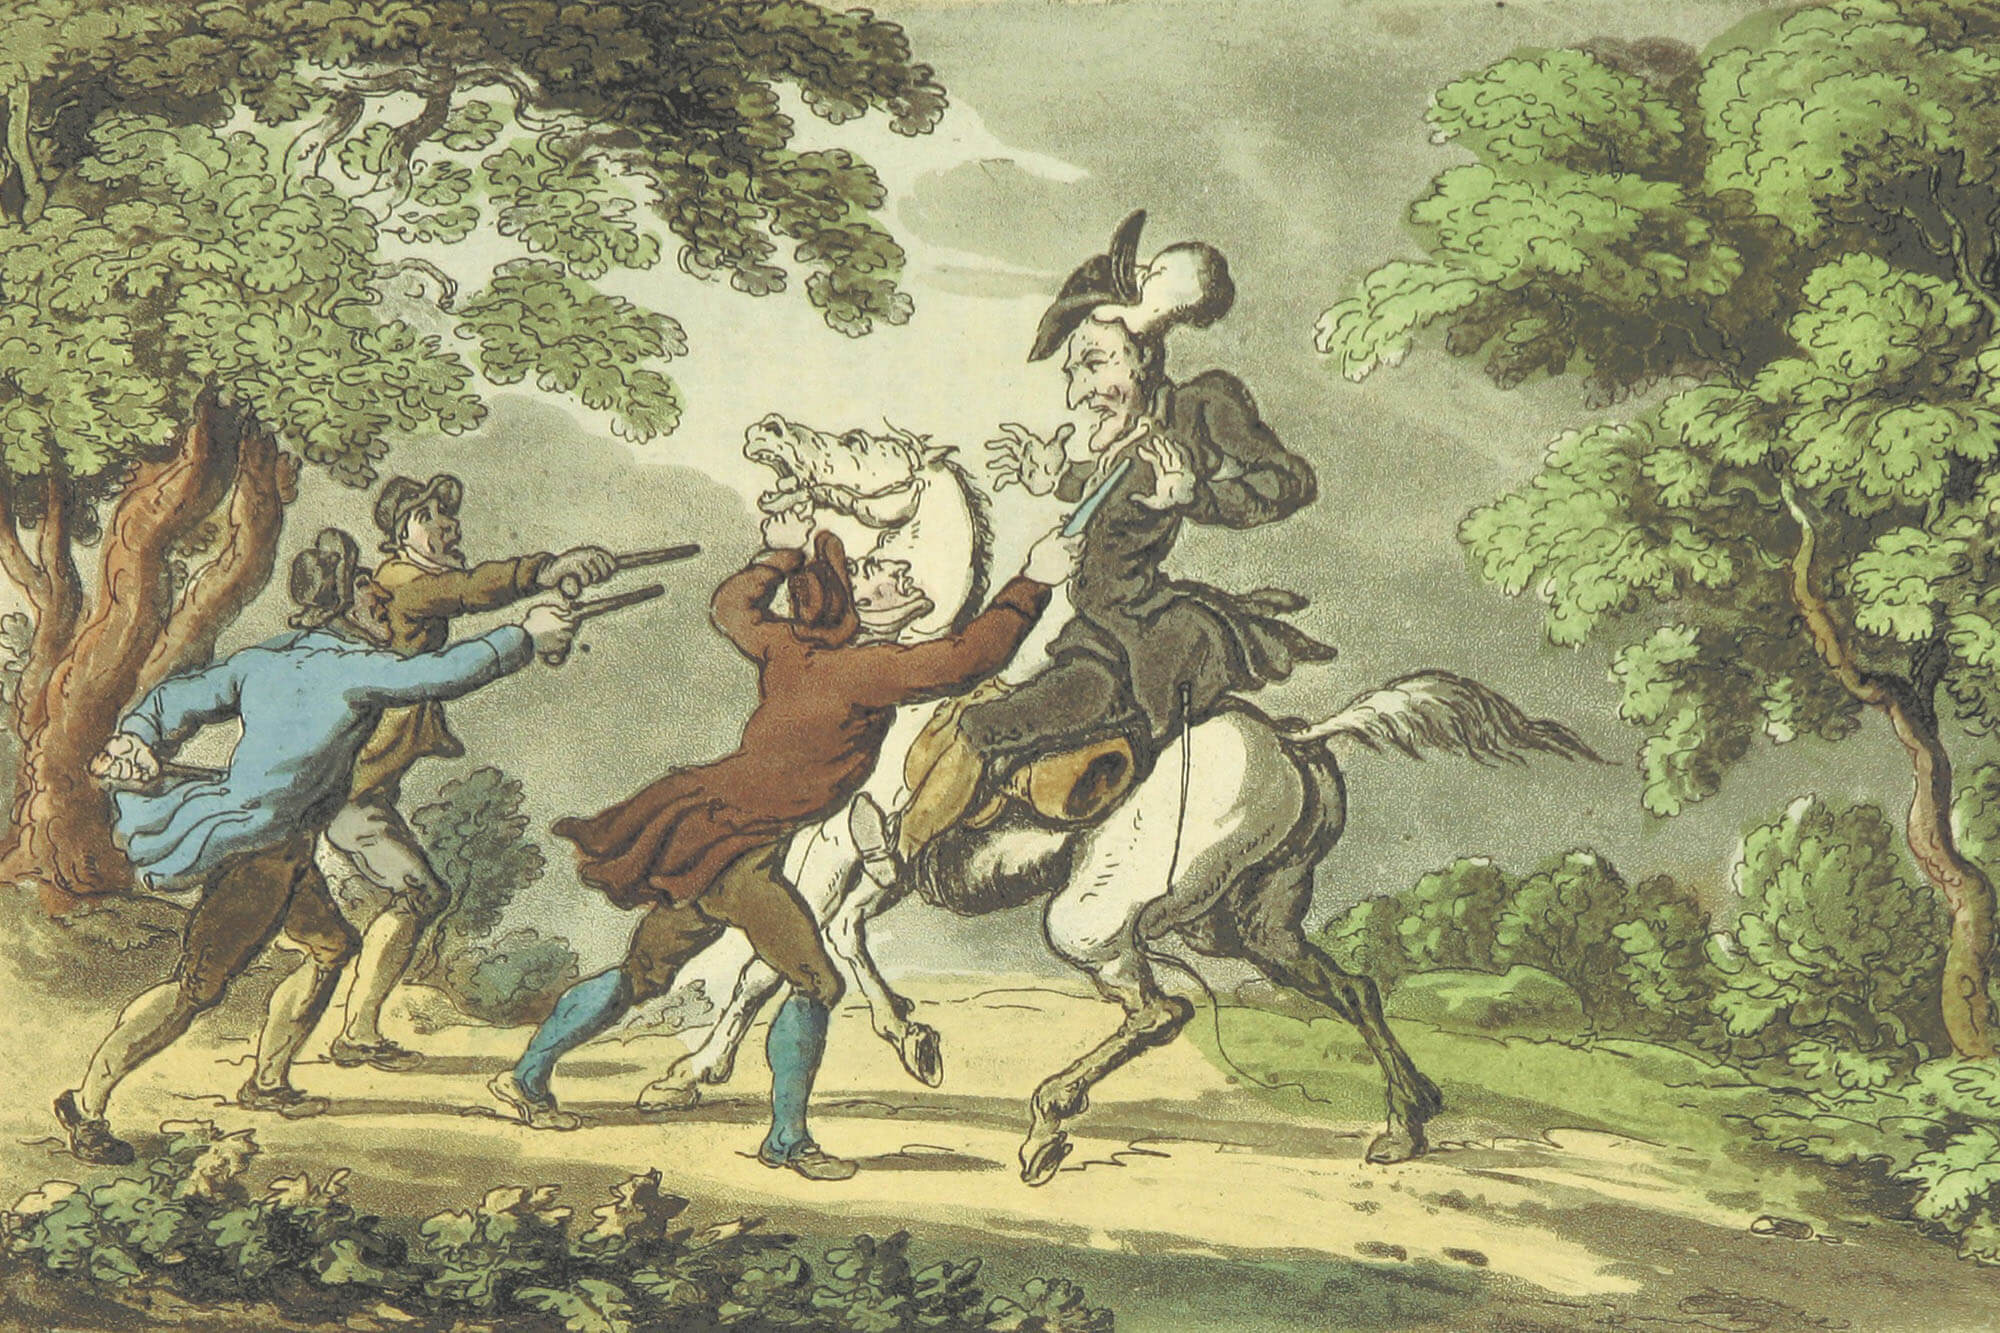 Illustration by Thomas Rowland of highwaymen at work, 1813